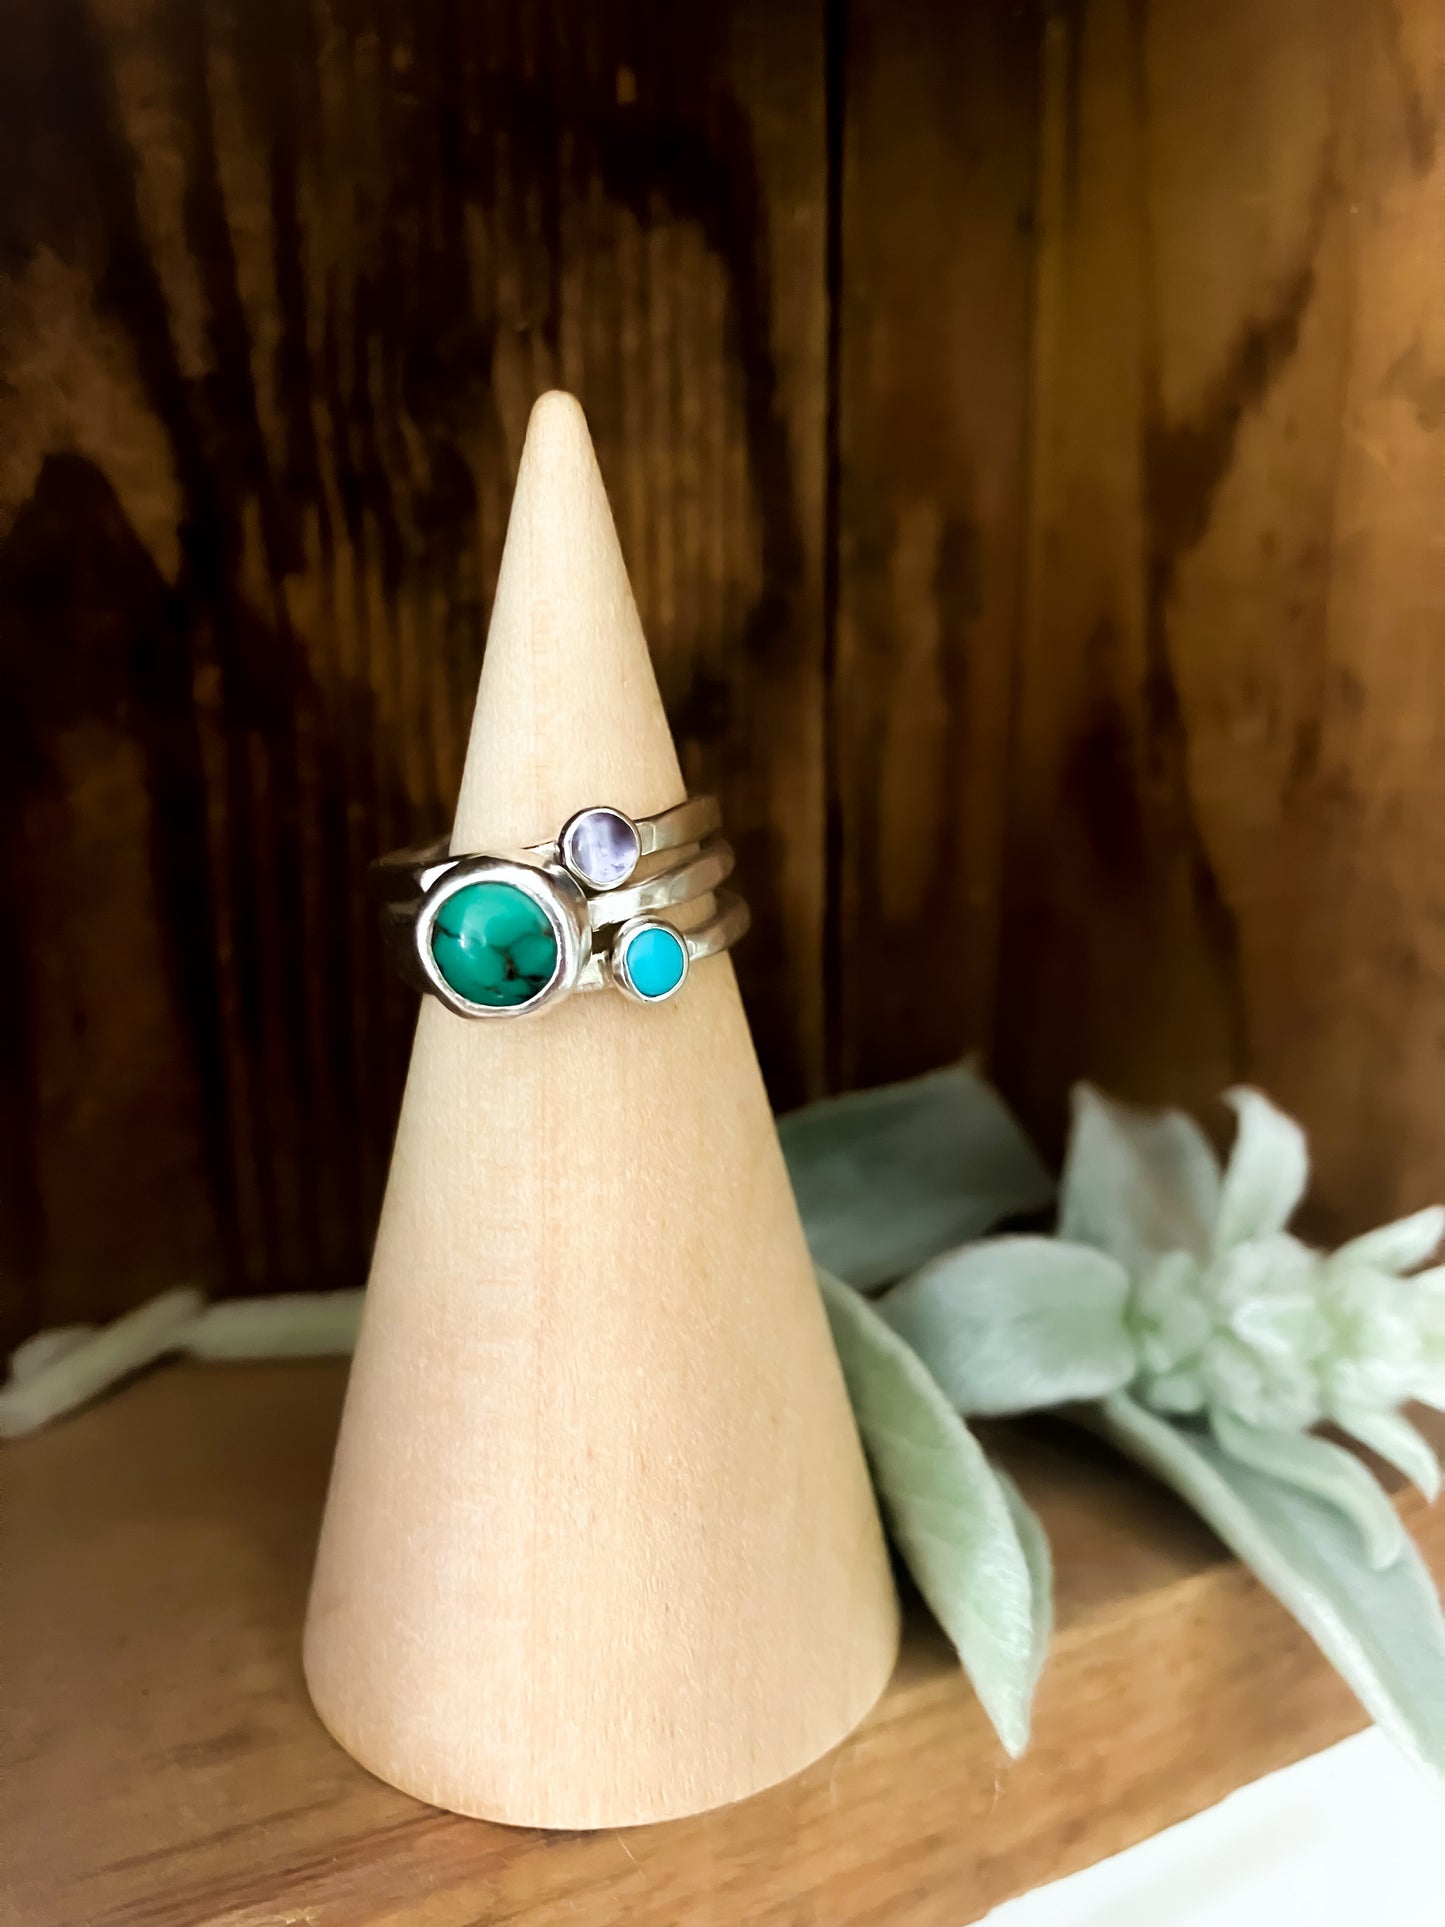 Green Varigated Turquoise Ring